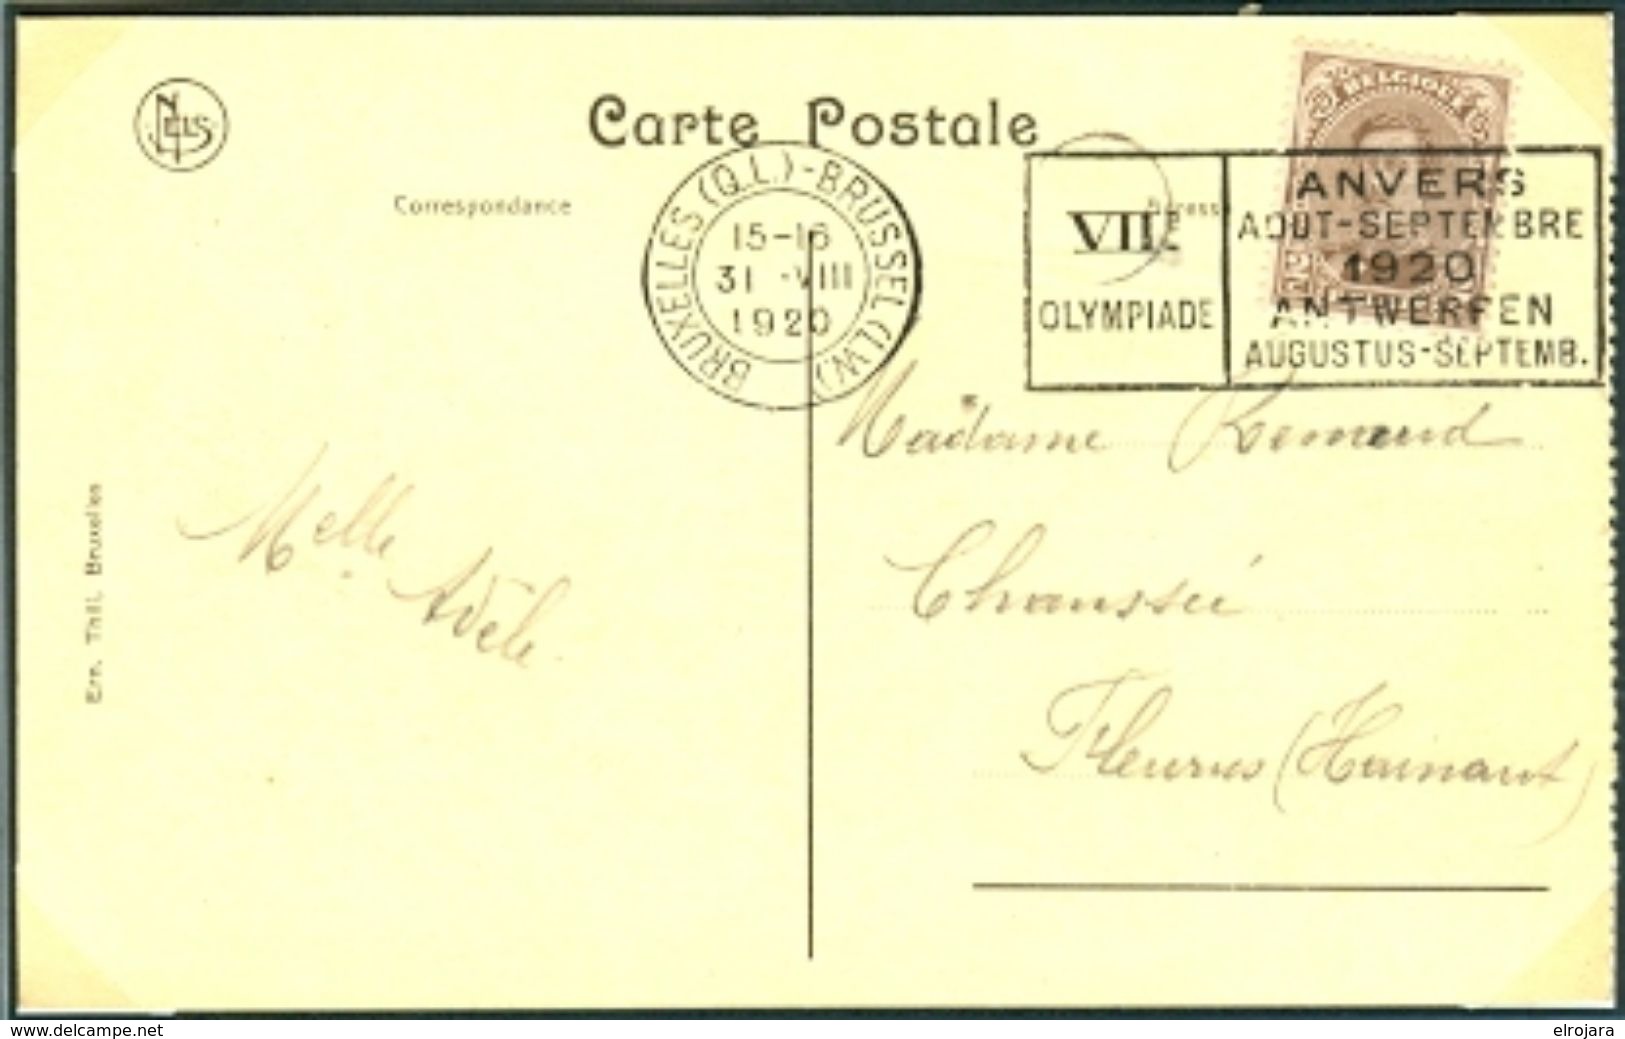 BELGIUM Postcard With Olympic Machine Cancel Bruxelles QL Brussel LW Dated 31-VIII 1920 Soccer Day - Verano 1920: Amberes (Anvers)